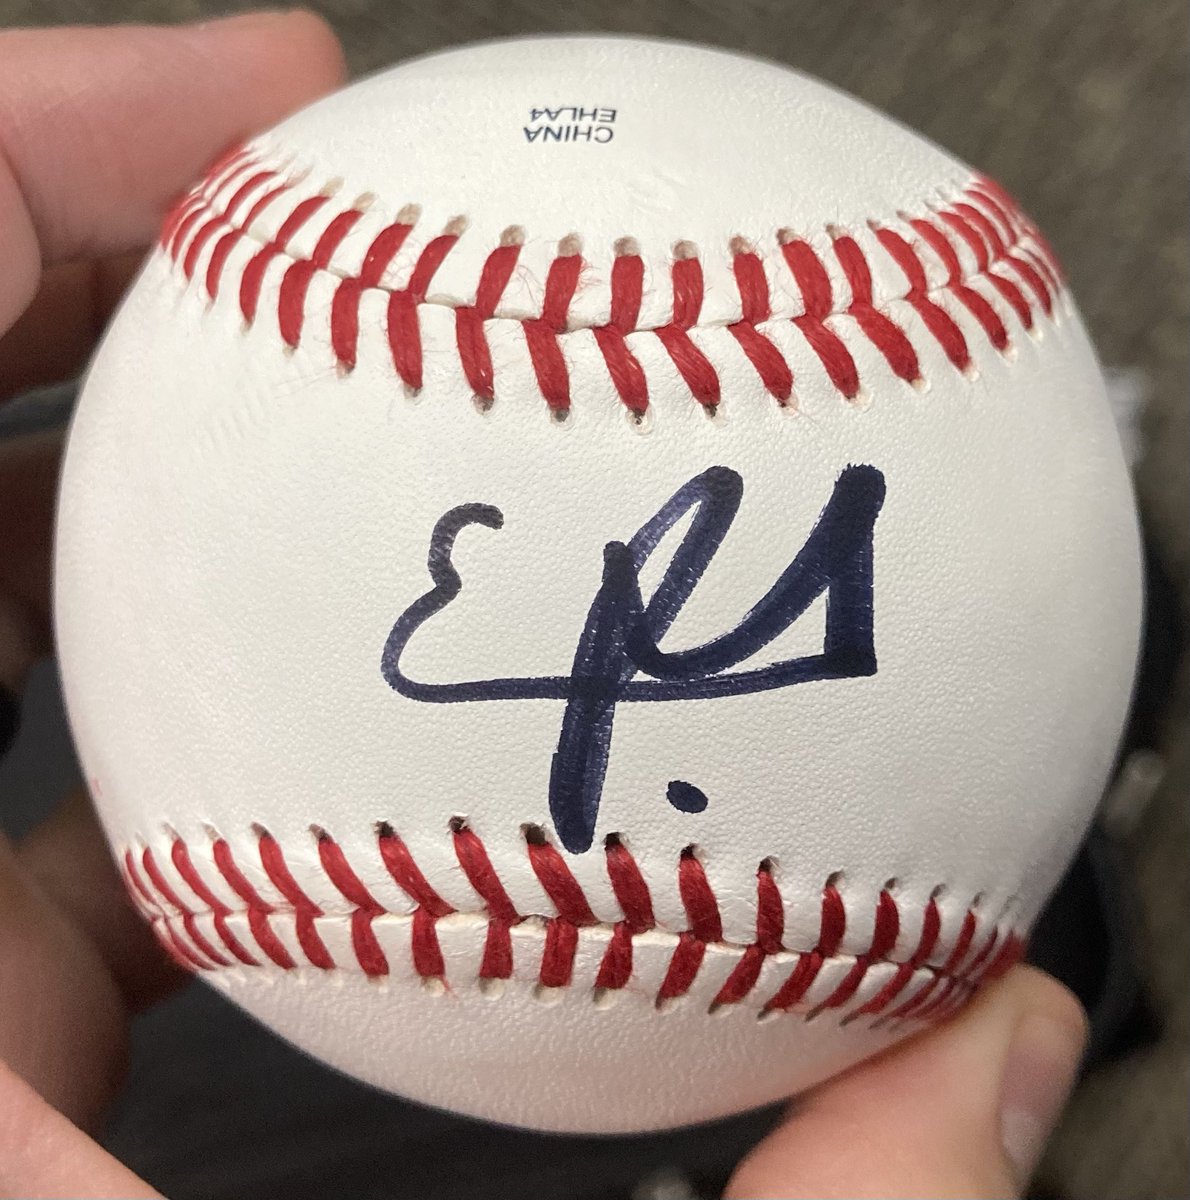 Congrats to Emmanuel Rodriguez for being named Twins @MiLB Player of the Month 👏

To celebrate, we are giving away 1 signed Emmanuel Rodriguez ball. To enter, you must follow @TwinsPlayerDev and RT this post 

We will pick the winner on Monday, May 13th @ 5pm CT 

#MNTwins